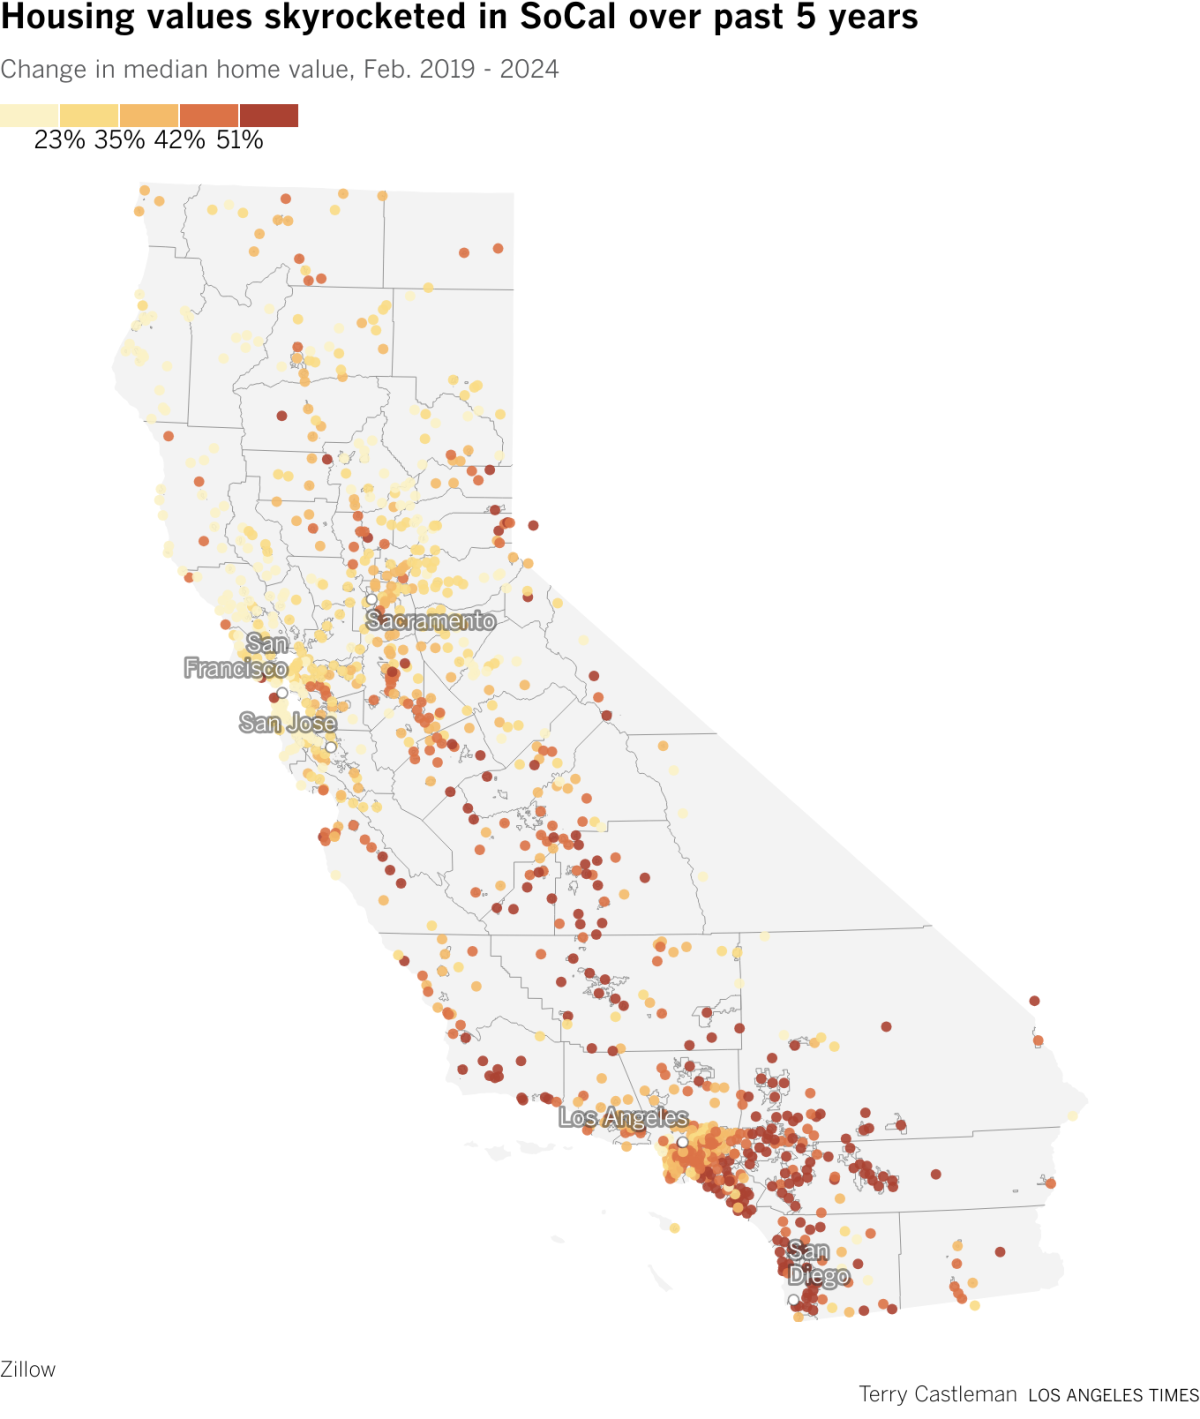 Map showing housing values rose fastest in Southern California cities over past 5 years